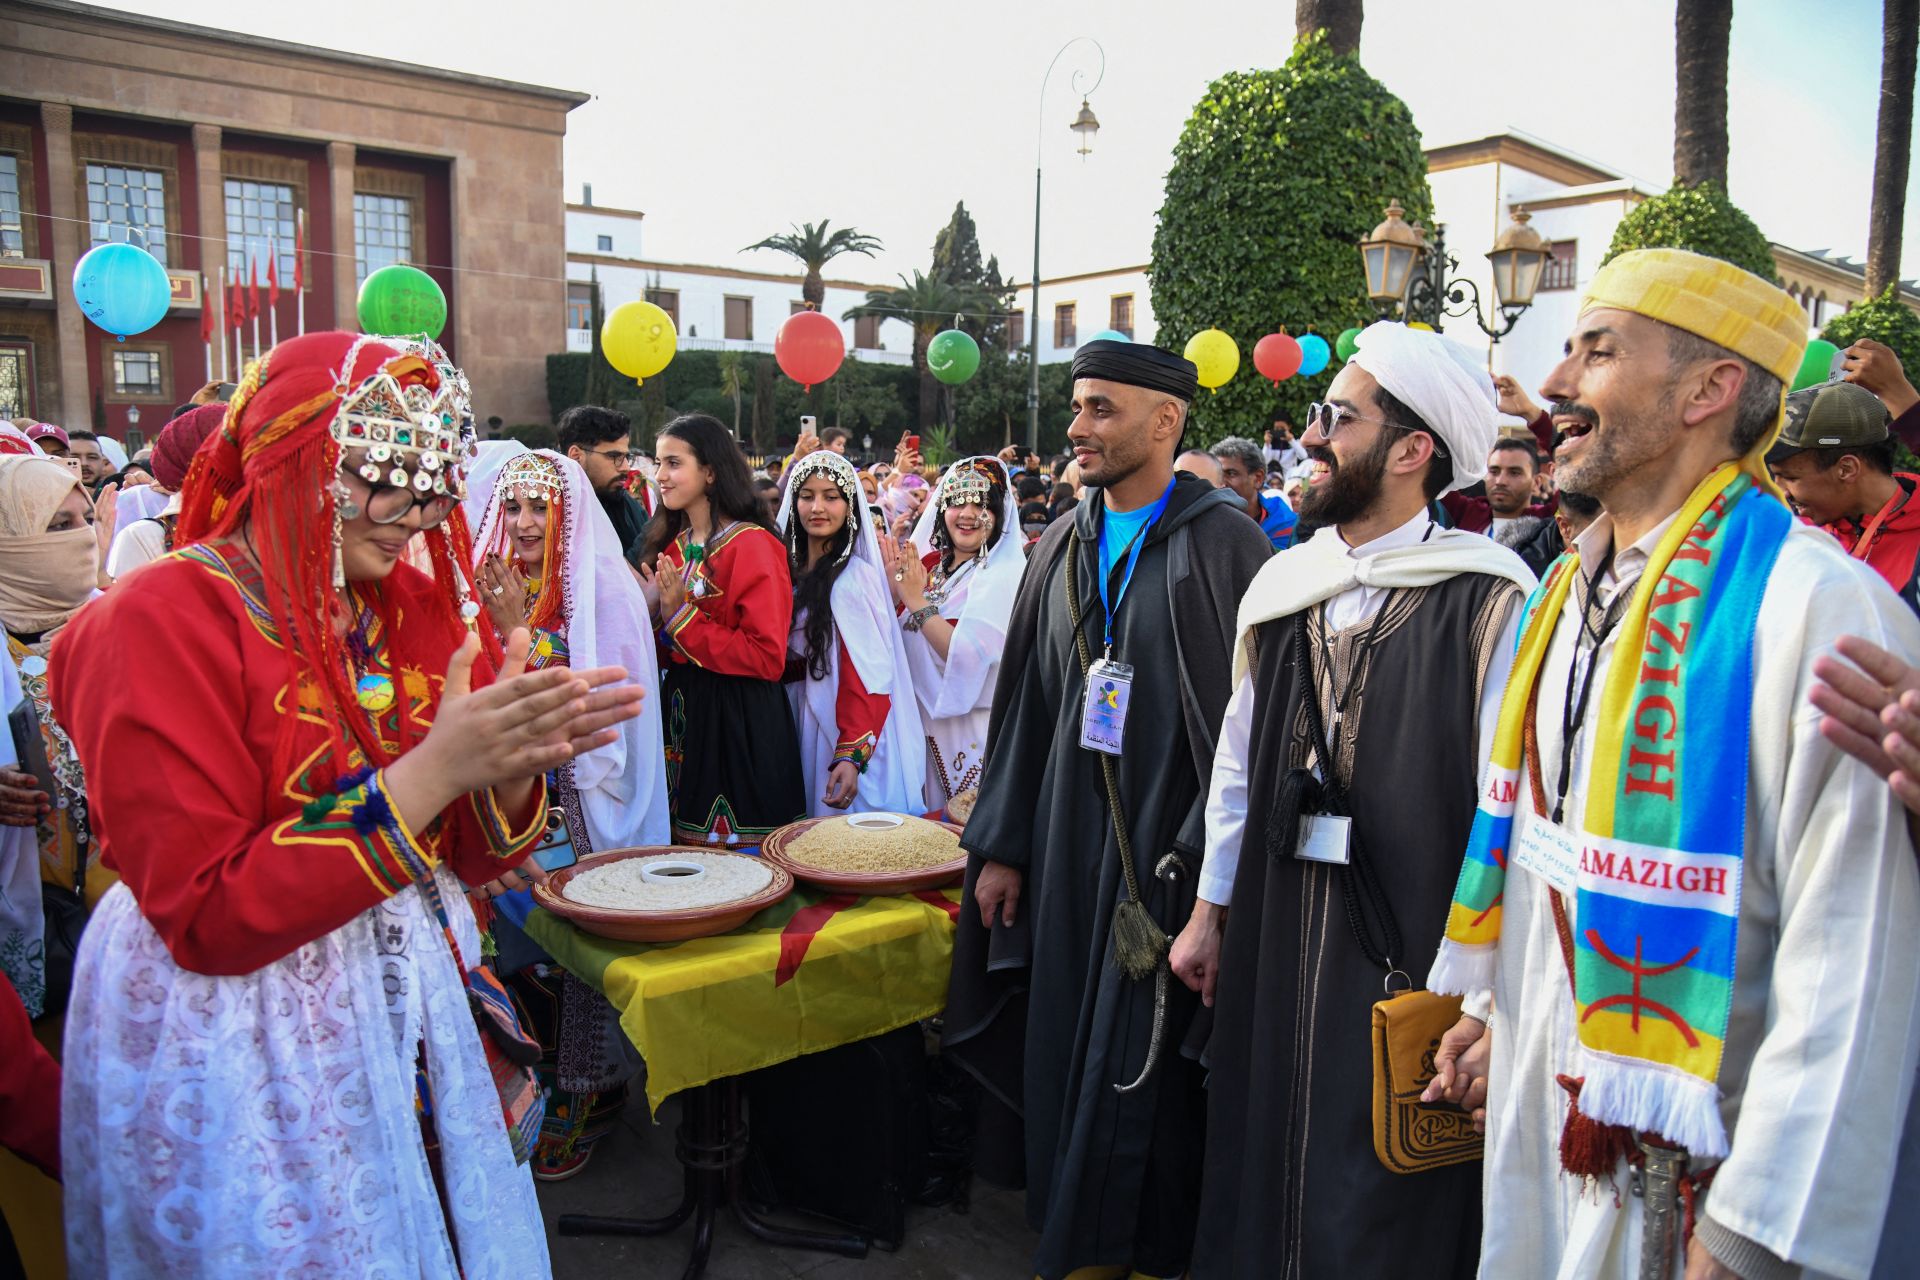 In Morocco, Amazigh Jews Confront Their Long-Held Ties to Israel